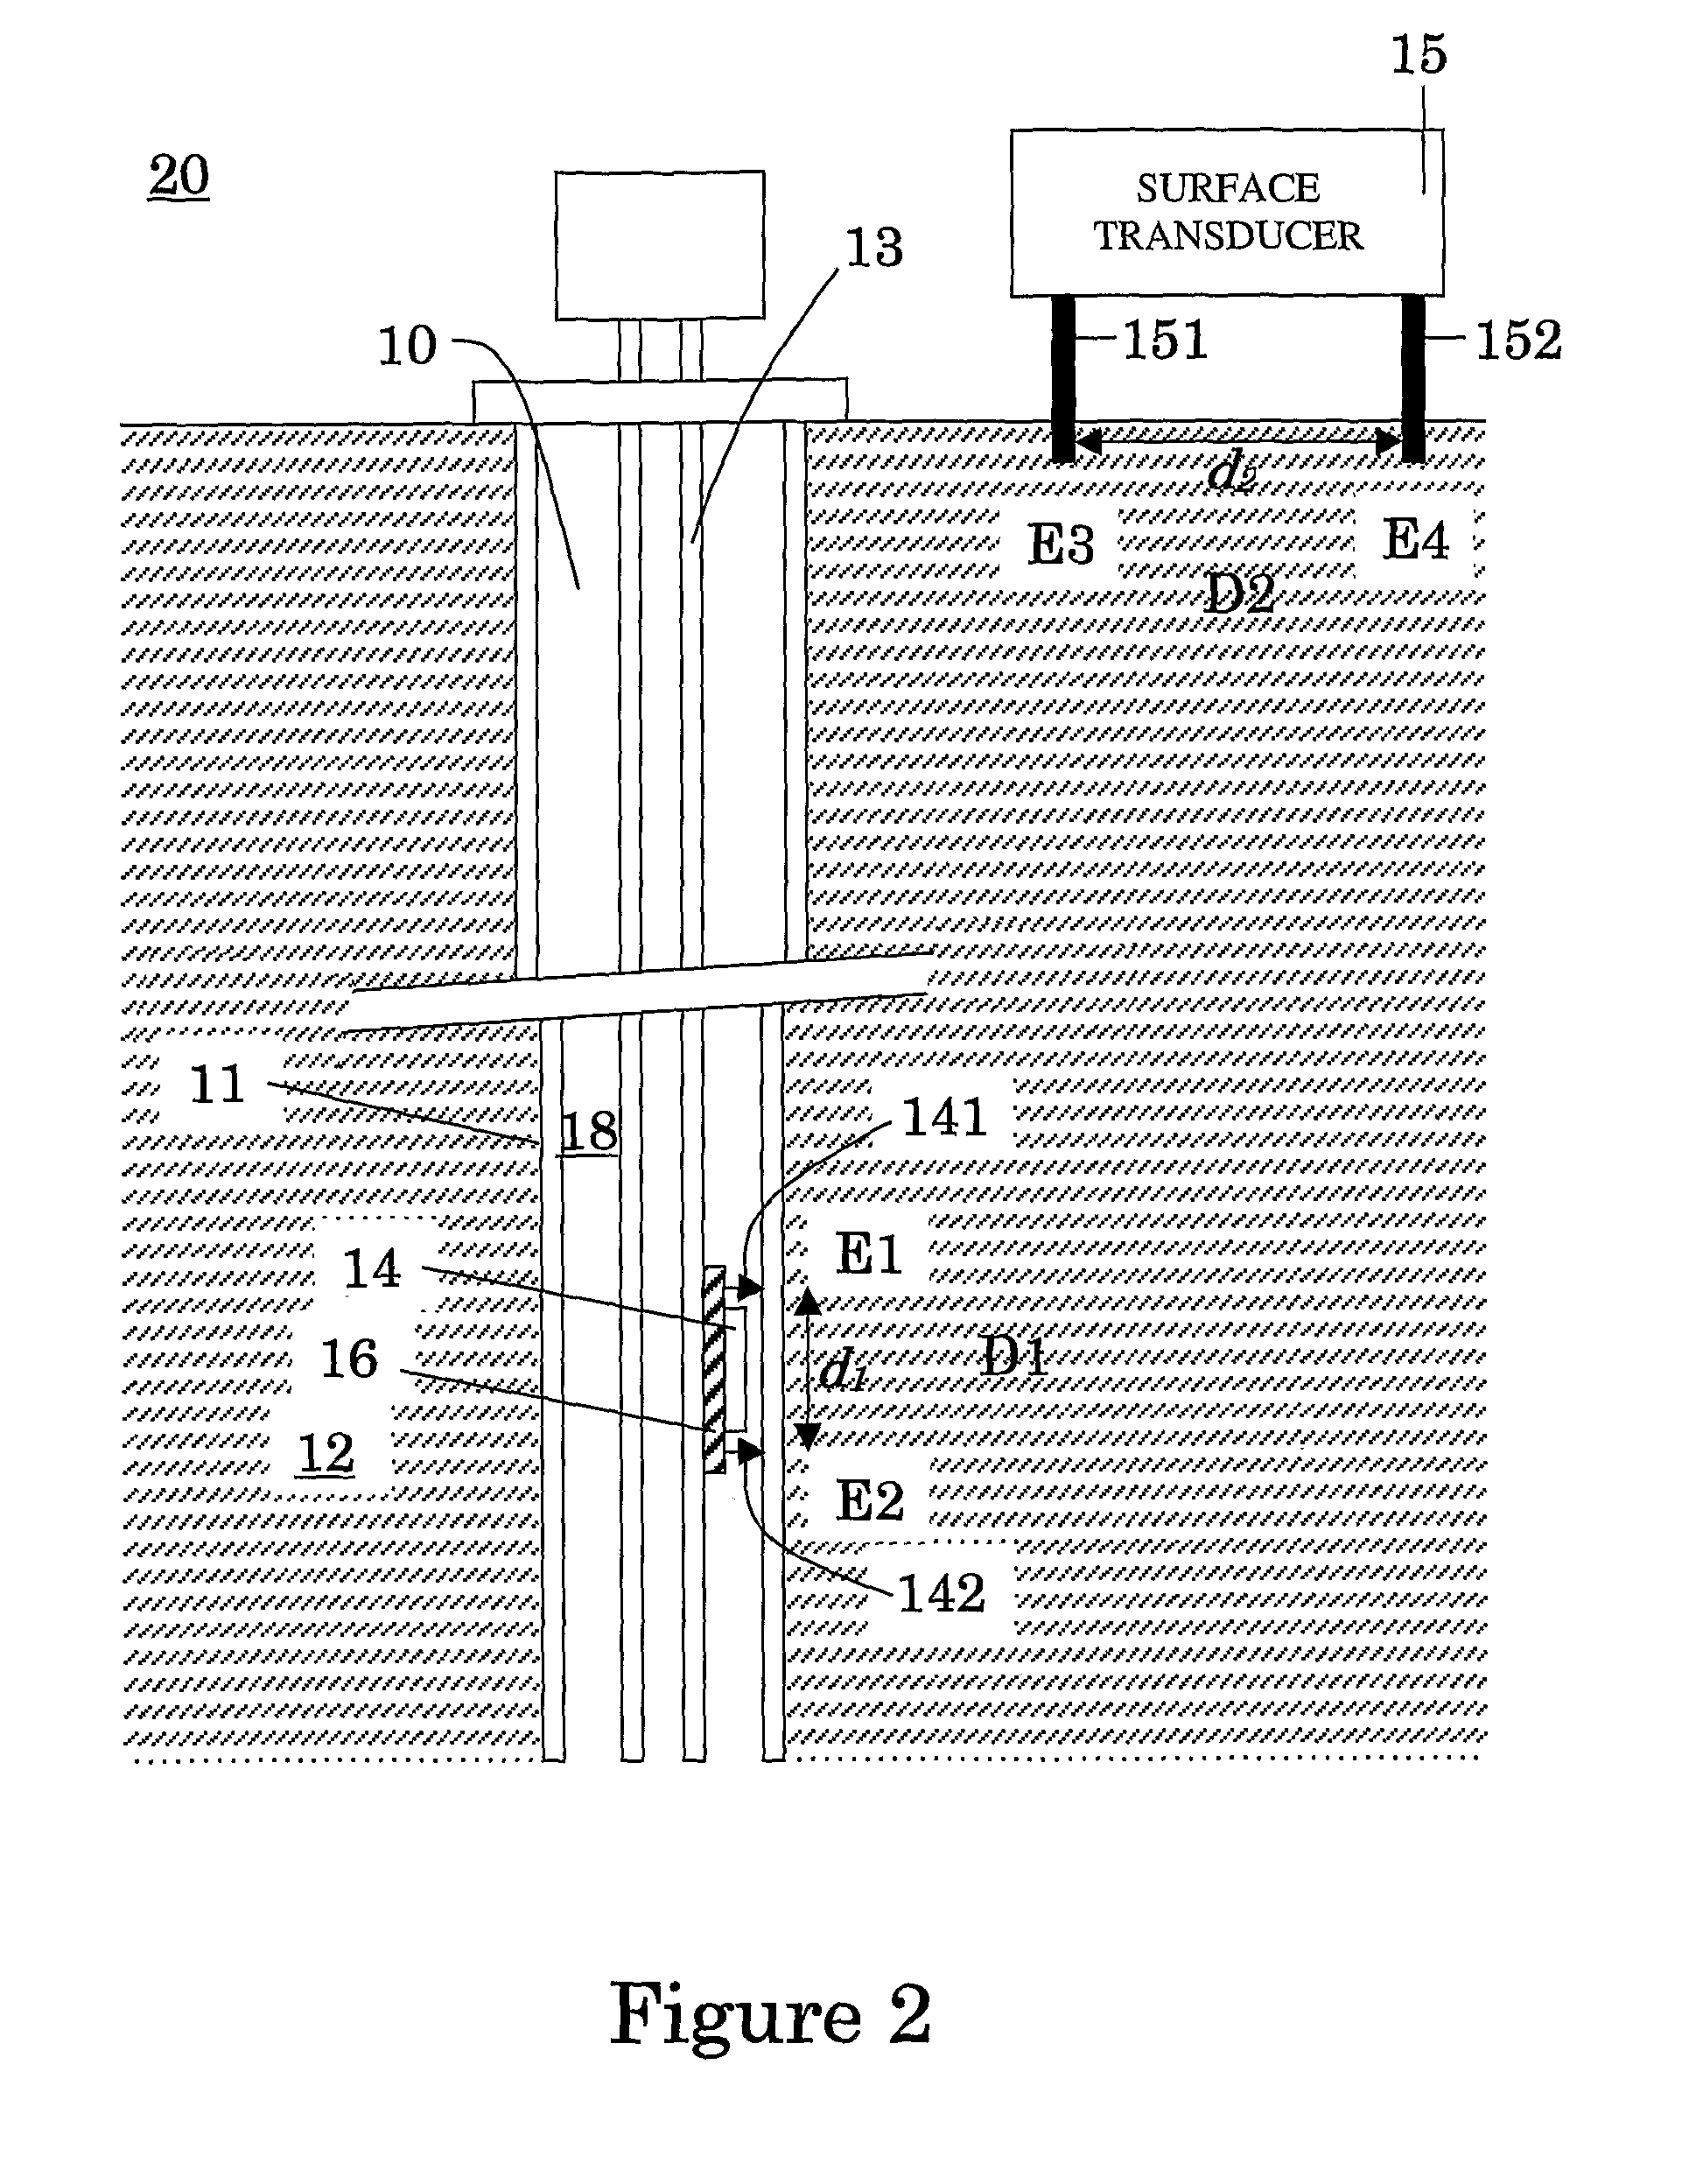 Method and apparatus for transmitting or receiving information between a down-hole eqipment and surface